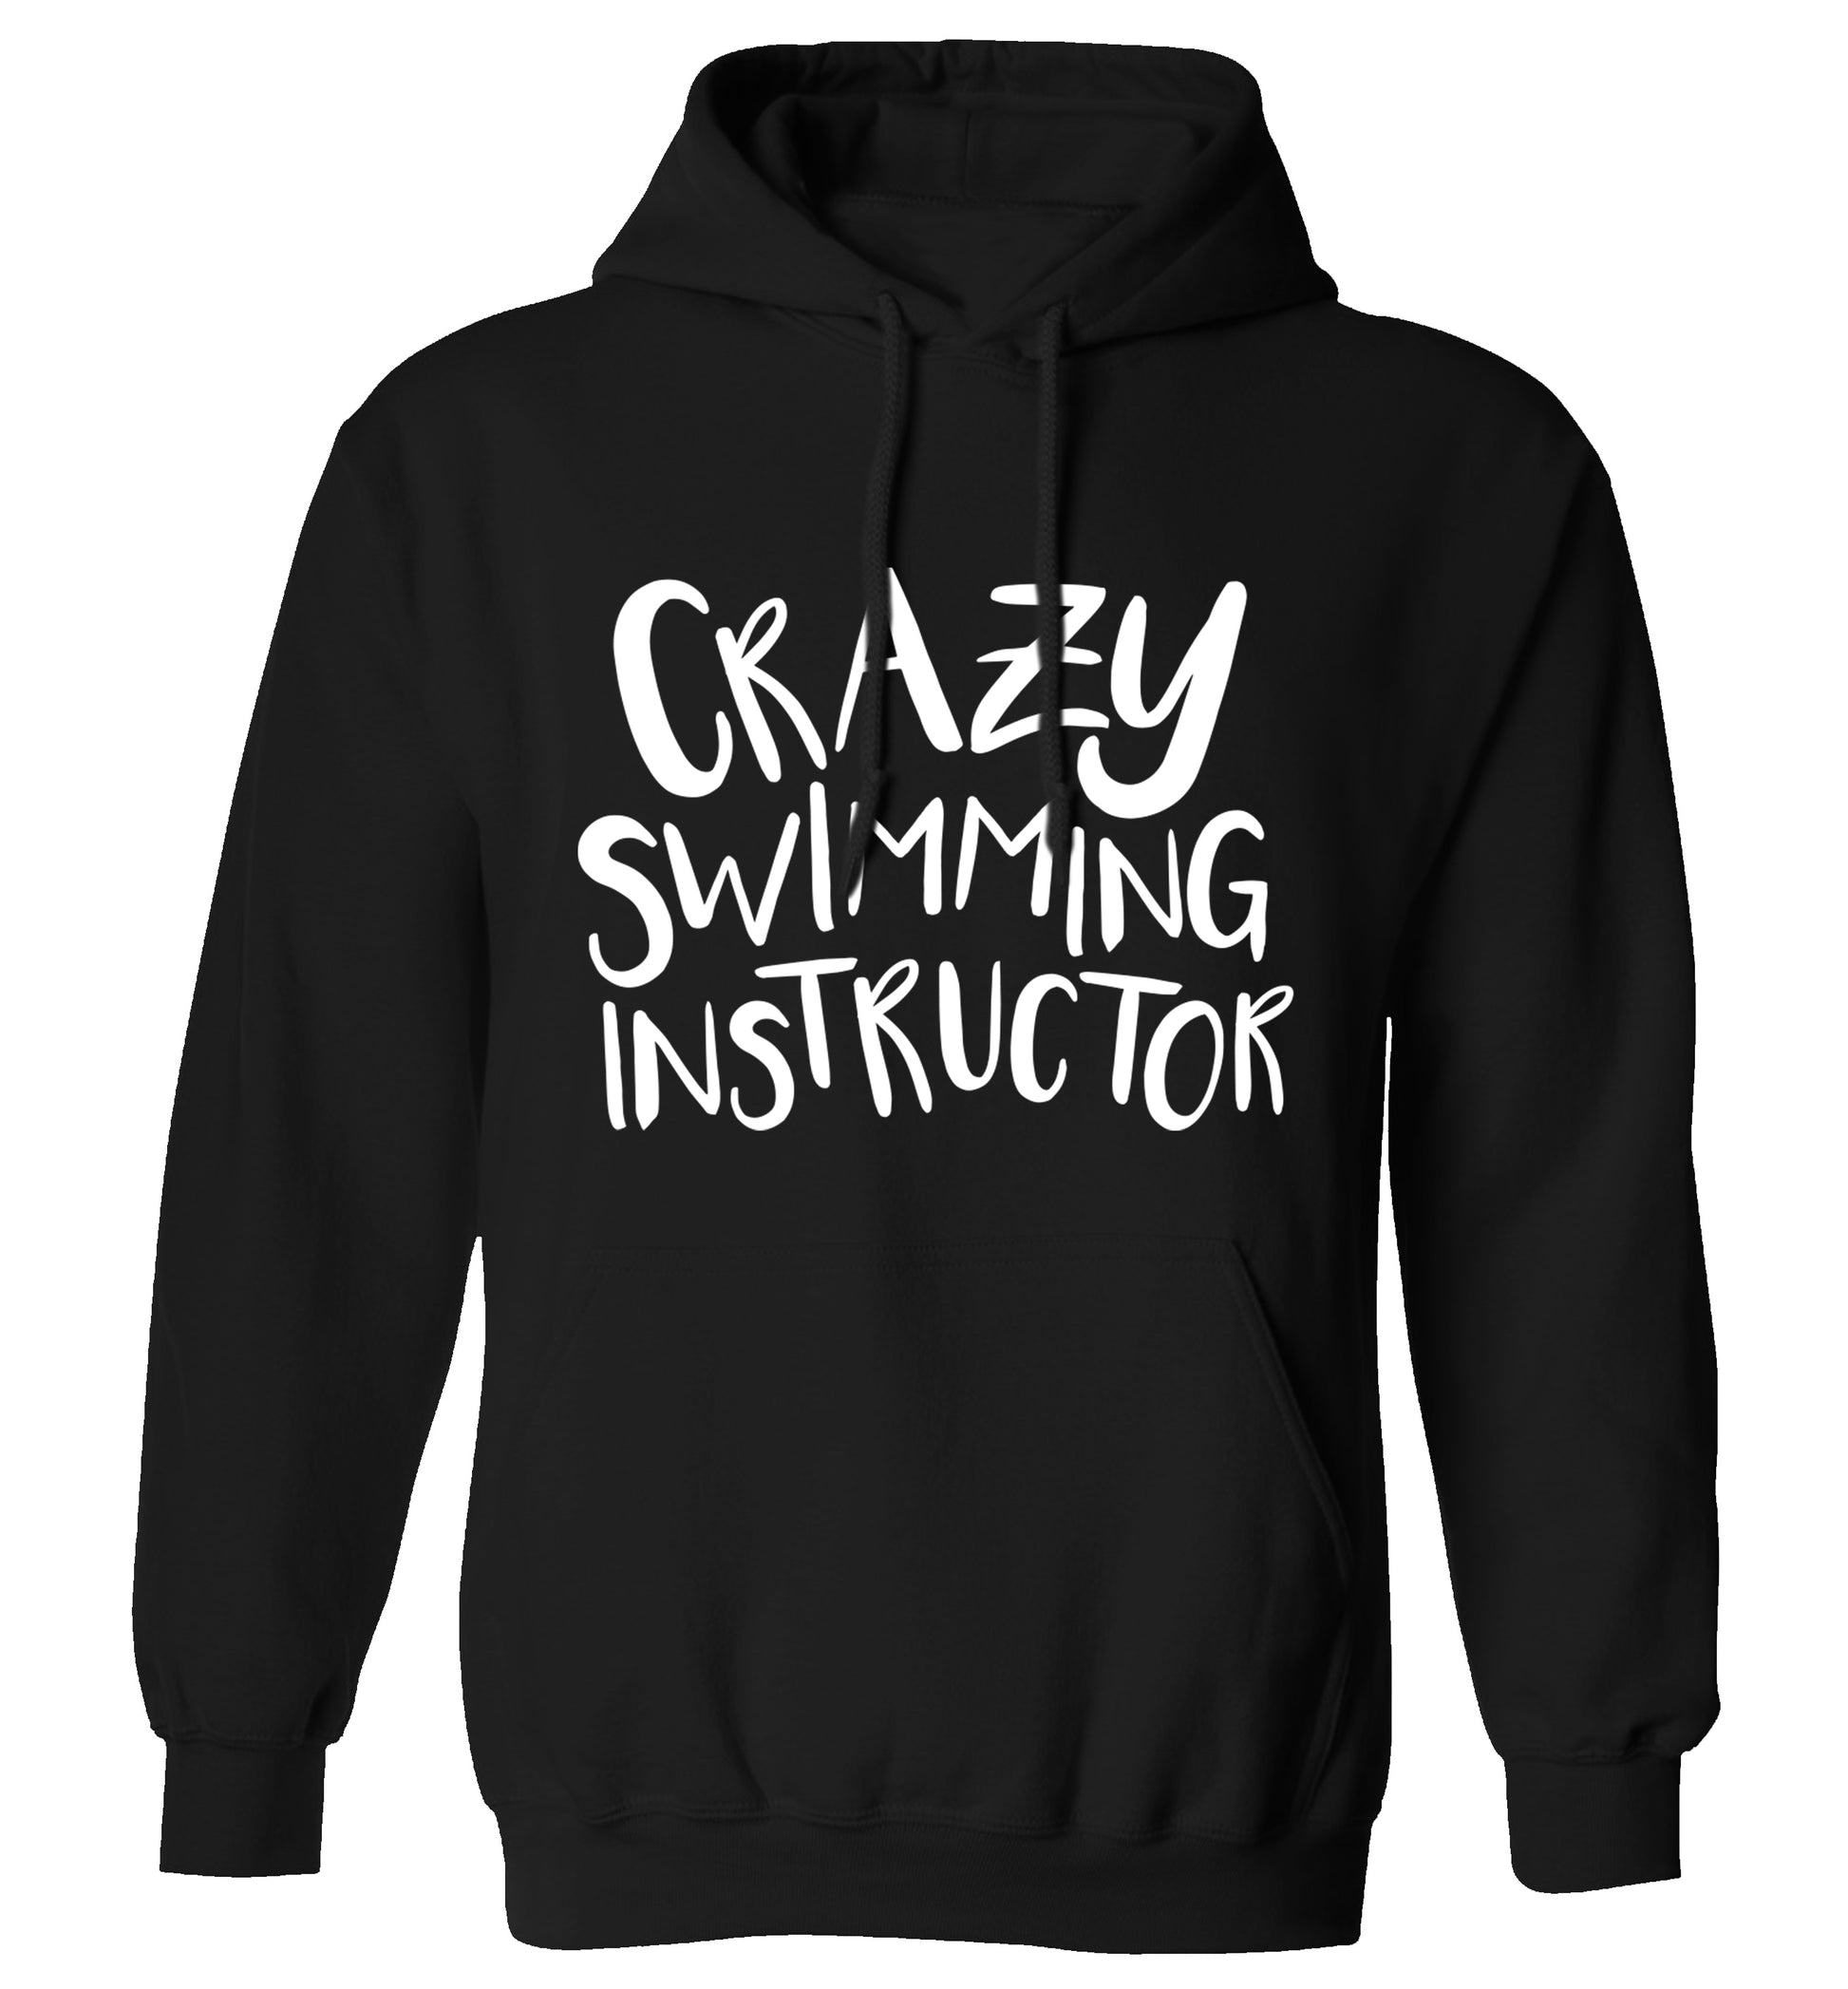 Crazy swimming instructor adults unisex black hoodie 2XL